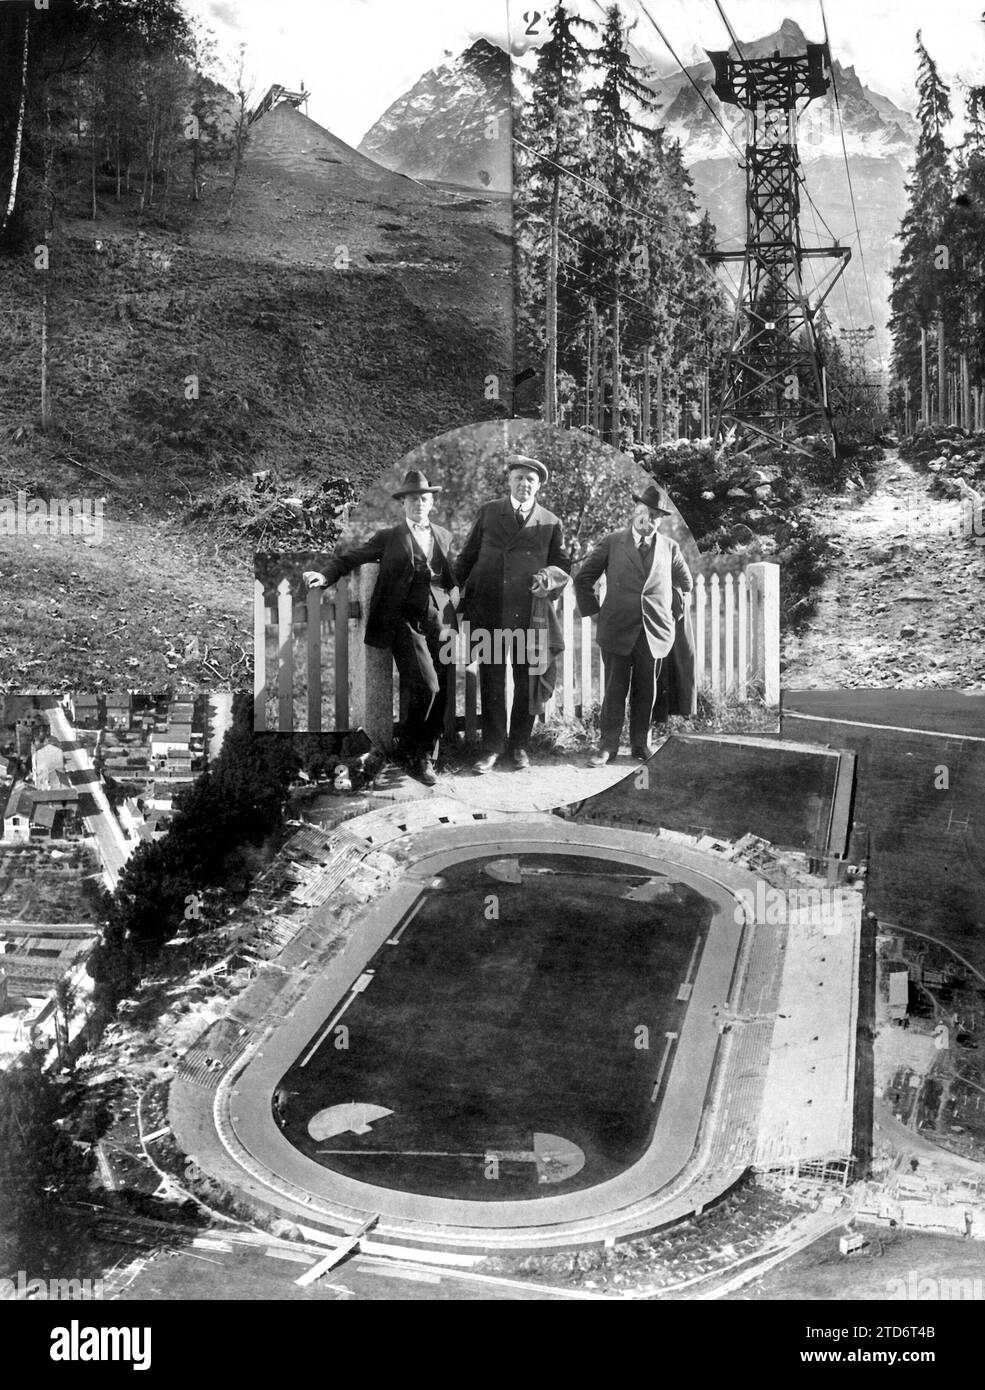 Preparations for the 1924 Olympic Games. In Chamonix, 1. Springboard for Ski Jumps 77 Meters High. 2. Airline that the Bolsleighs and the Competitors will use to climb the Pic Du Midi, 3. Messrs. Frantz-Reichel. Secretary of the French Olympic Committee; Edstrom. President of the International Athletics Federation and Peycelon delegate of the French government, 4. Paris current status of the Works at the Colombes stadium. Credit: Album / Archivo ABC Stock Photo